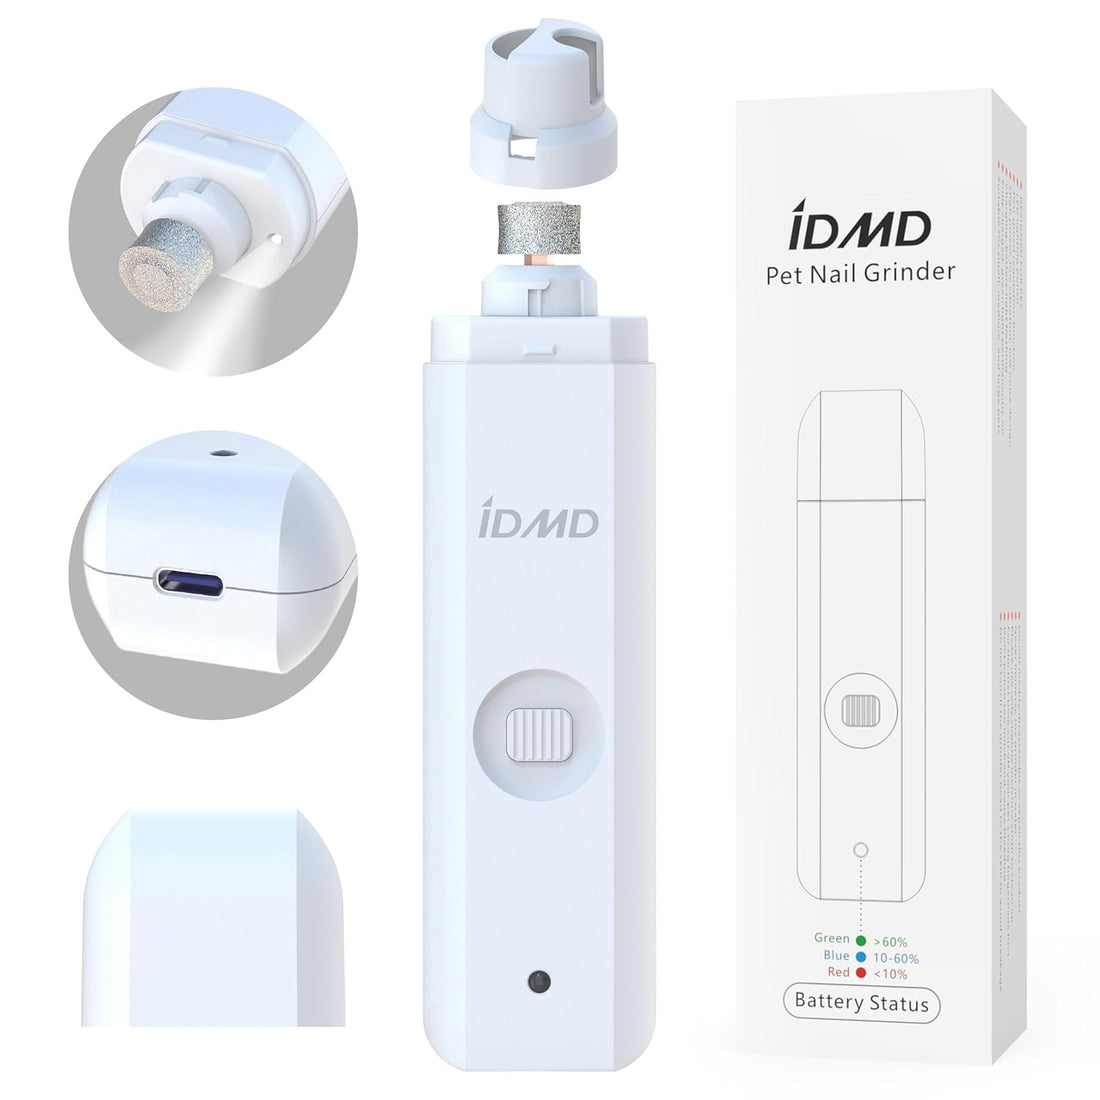 IDMD Dog Nail Grinder Upgraded Professional Powerful 2-Speed Motor - LED Light - Rechargeable - Pet Grooming Kit - Painless Paws Quick Grooming & Smoothing for Small Medium Large Dogs & Cats (White)